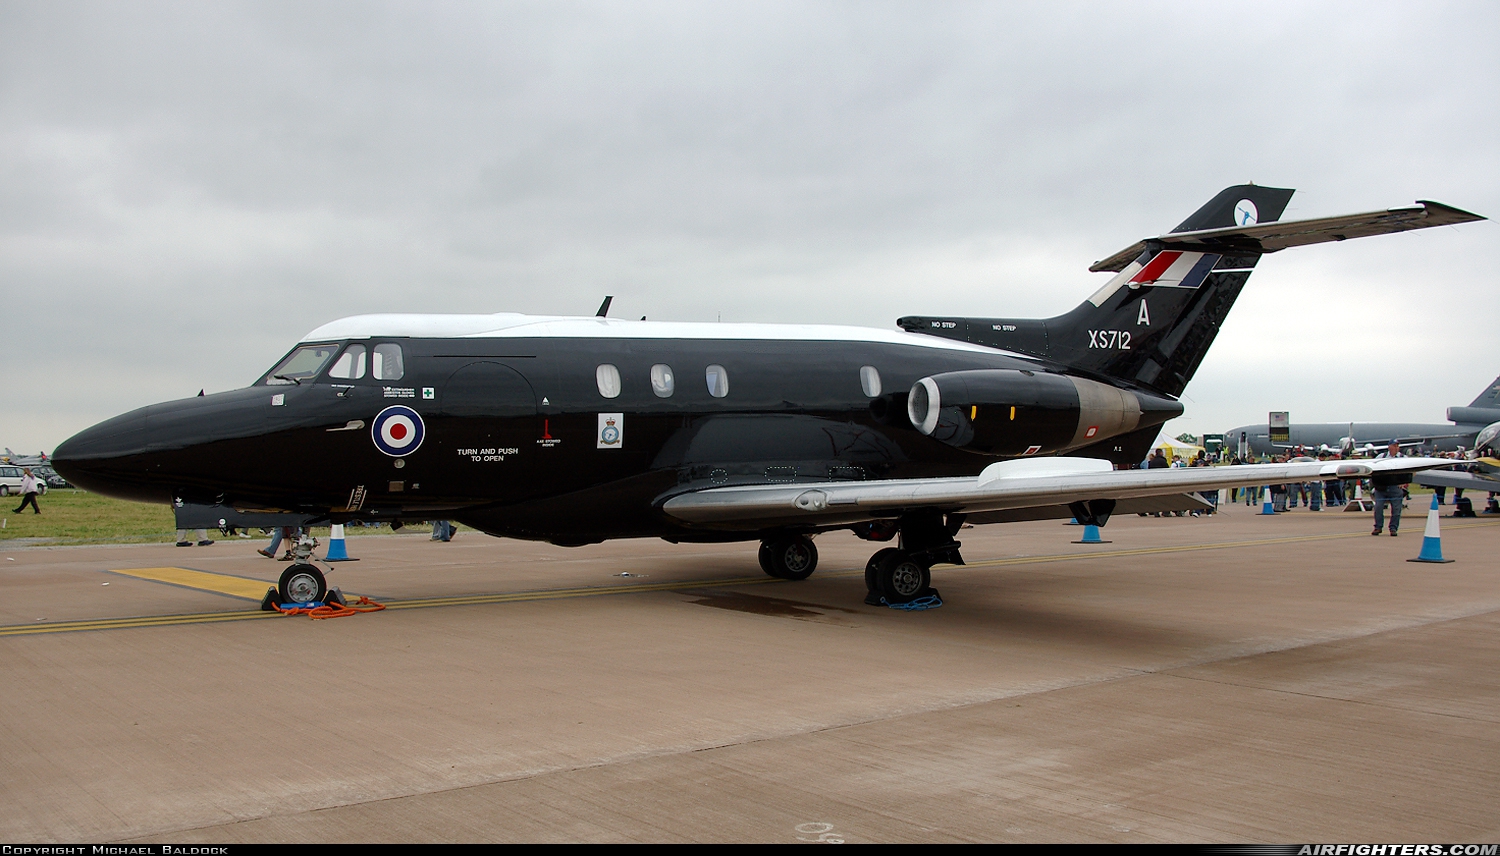 UK - Air Force Hawker Siddeley HS-125-2 Dominie T1 XS712 at Fairford (FFD / EGVA), UK